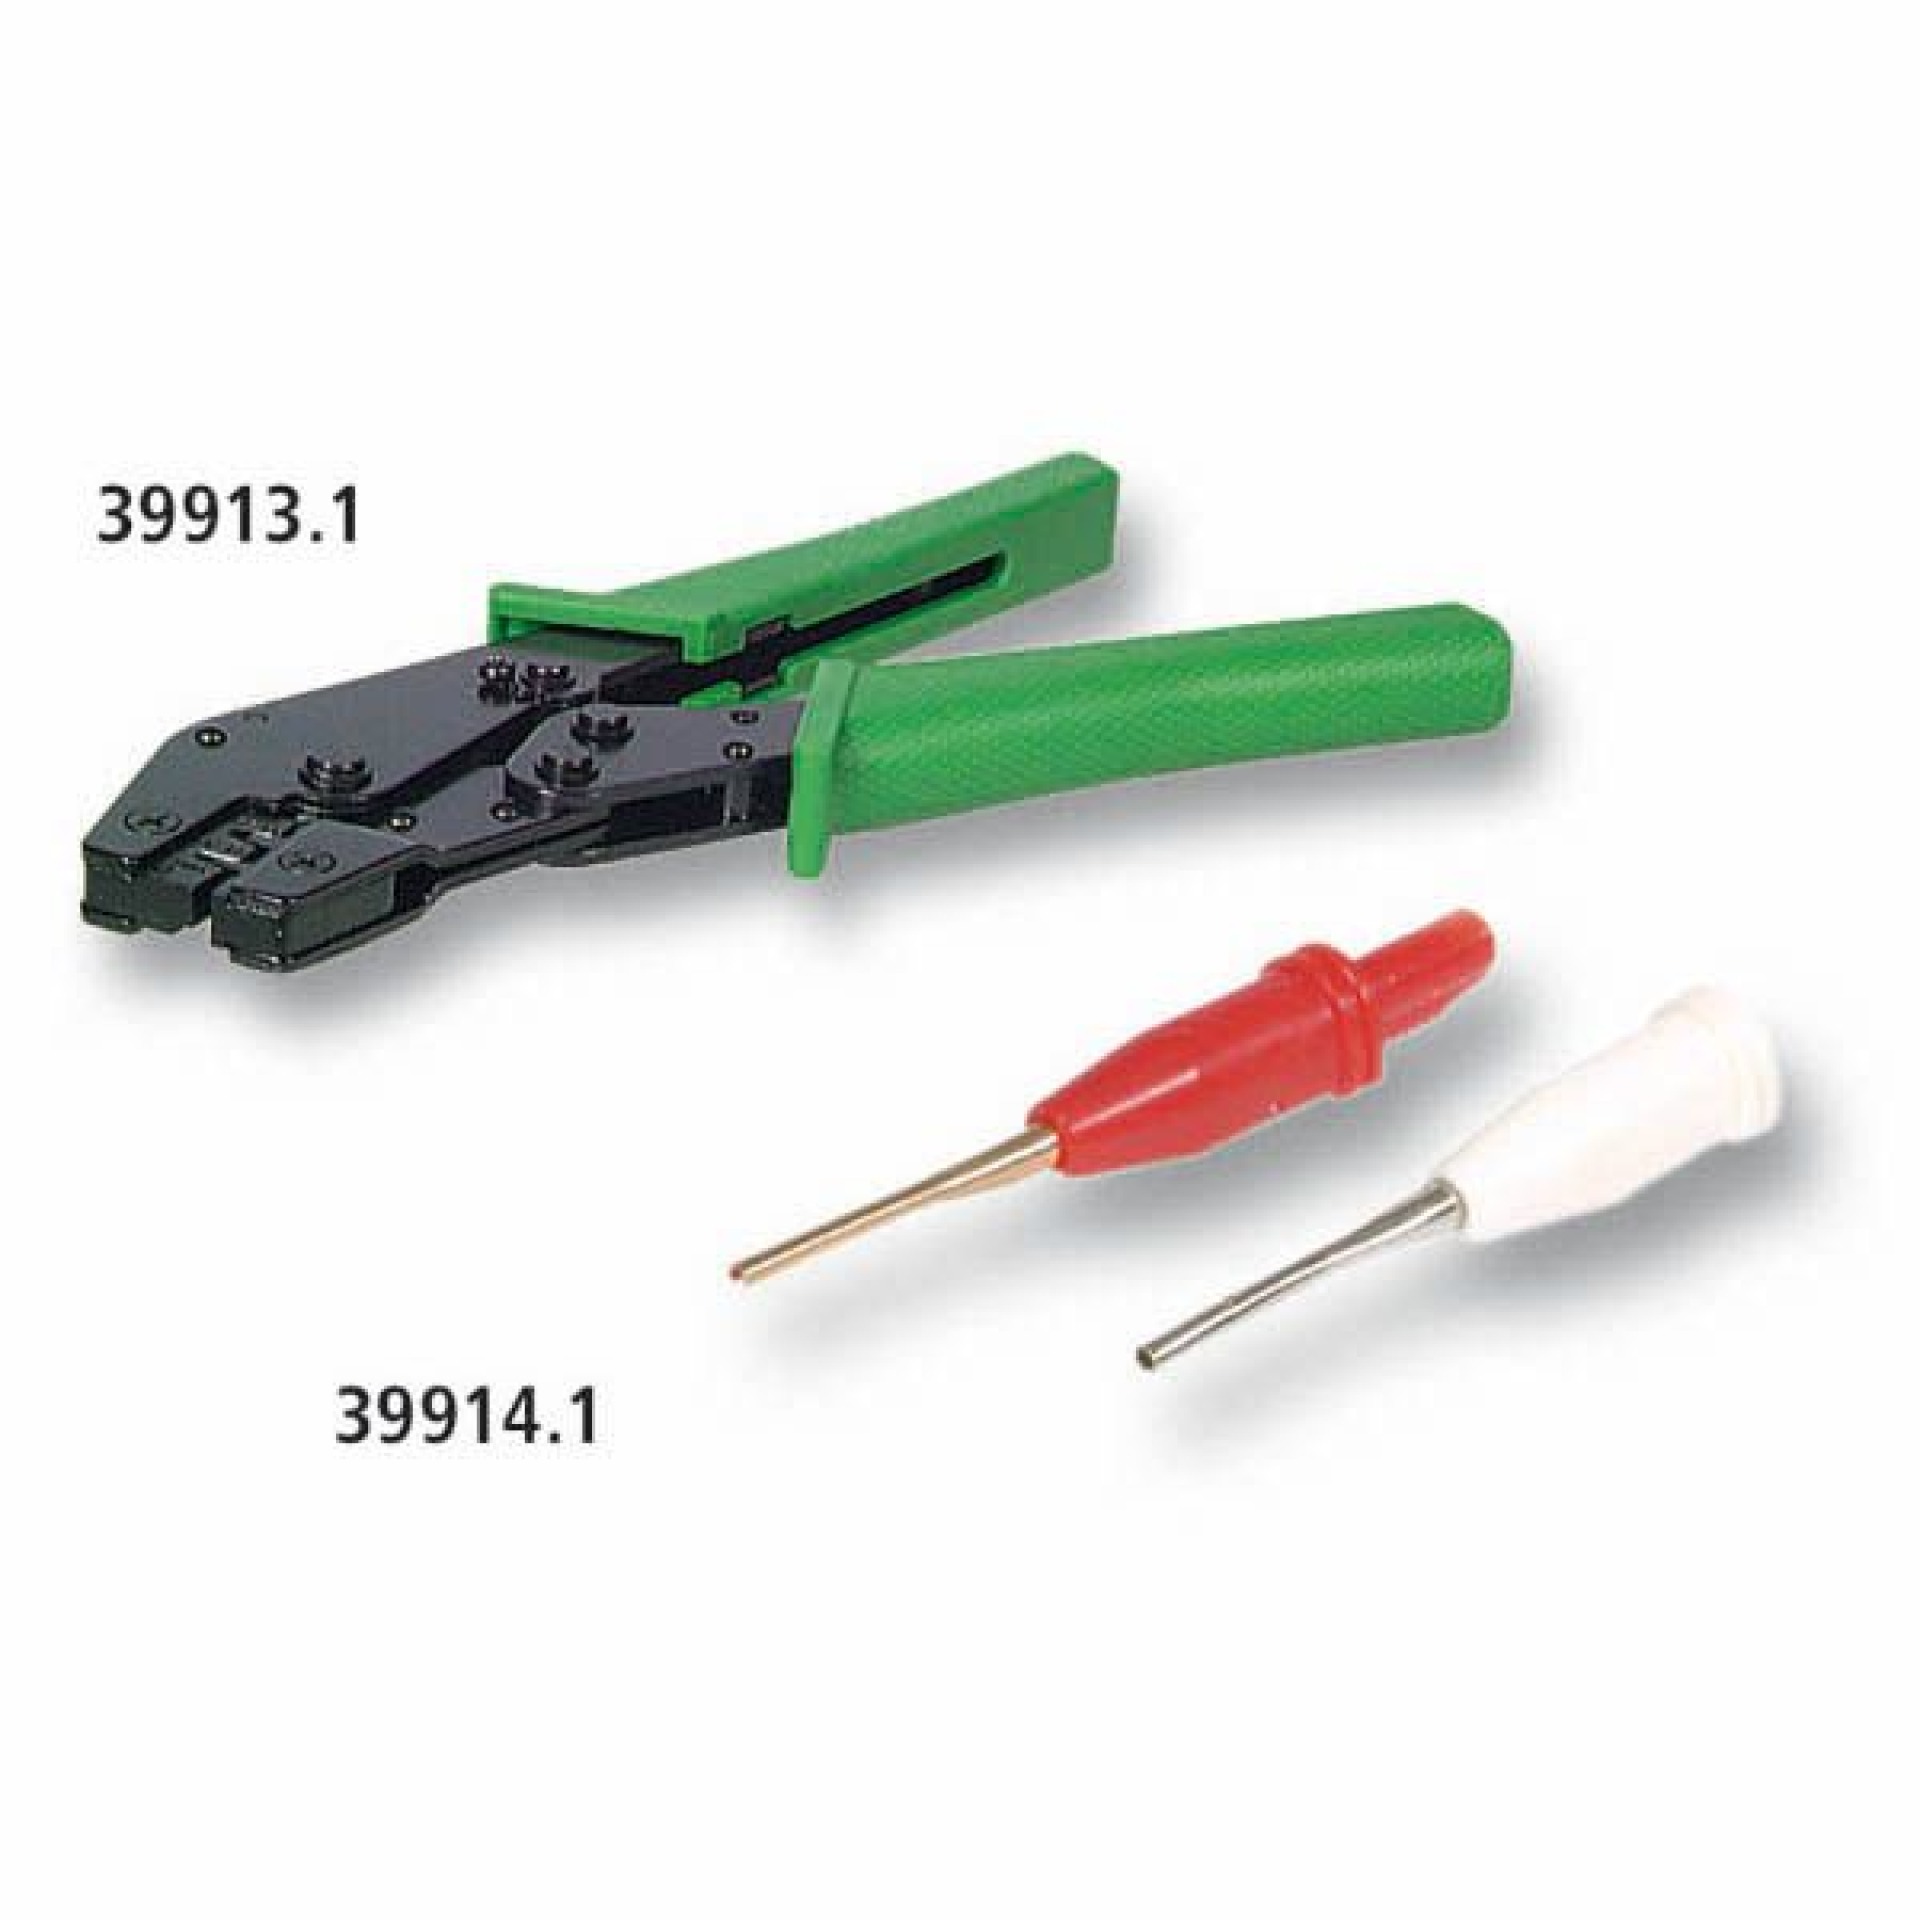 DSub Crimping tool, for AWG18-22 and AWG24-30